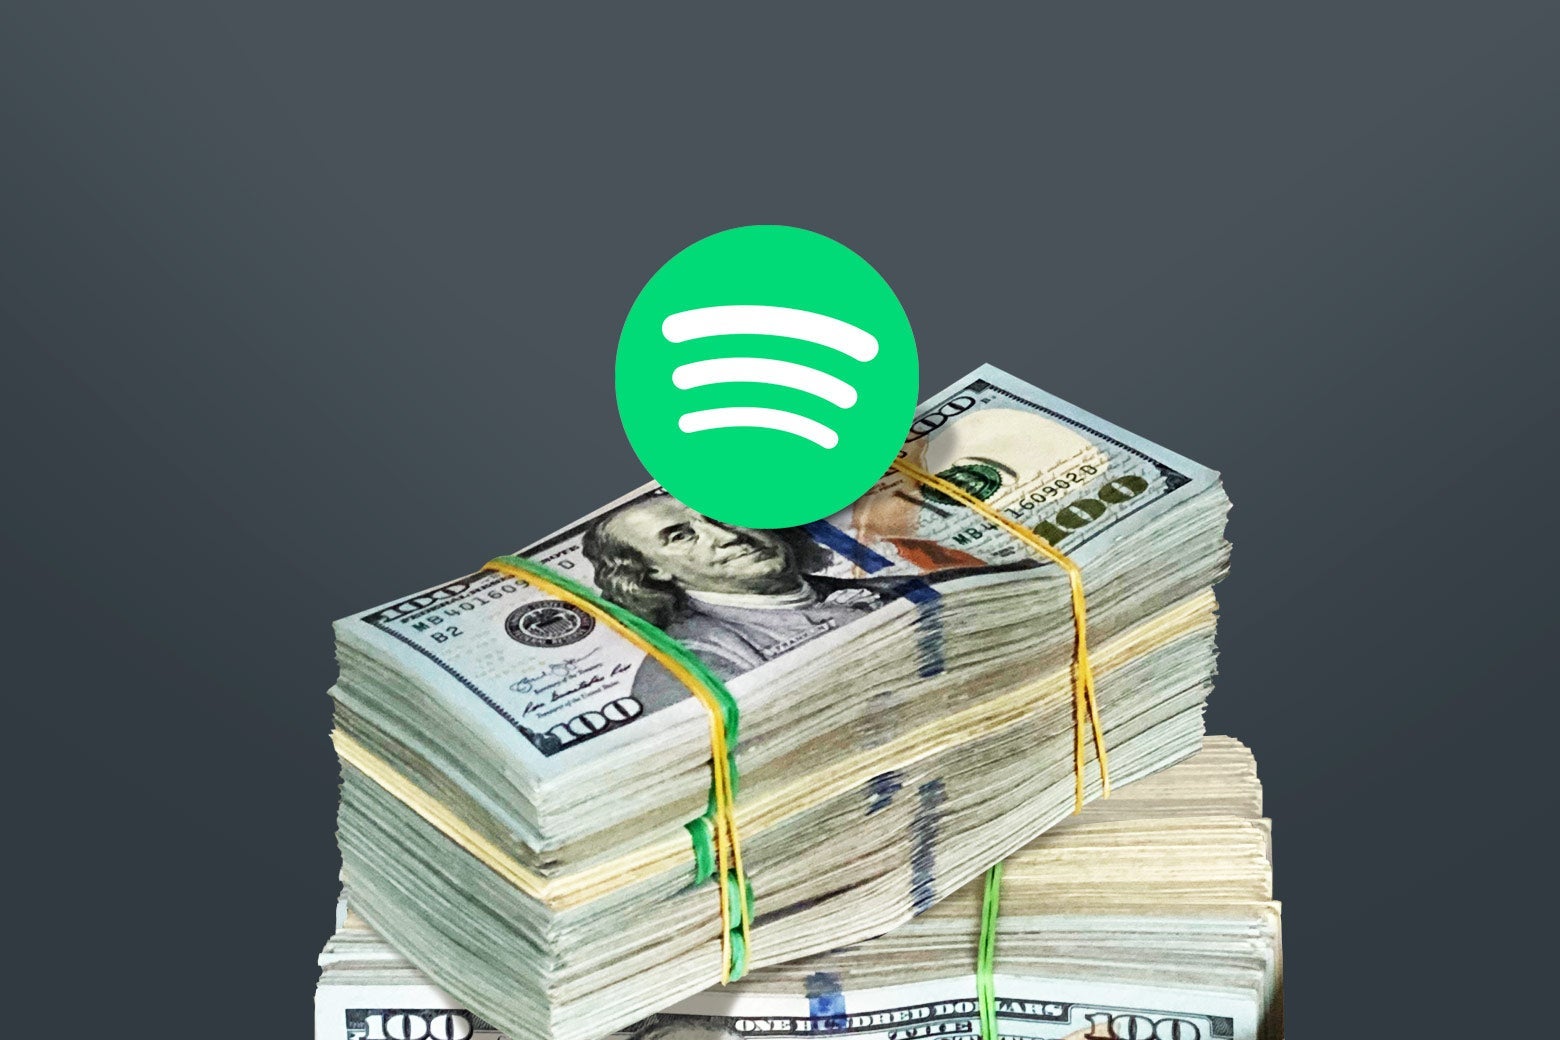 The Spotify logo is seen on top of a stack of banded bundles of $100 bills.